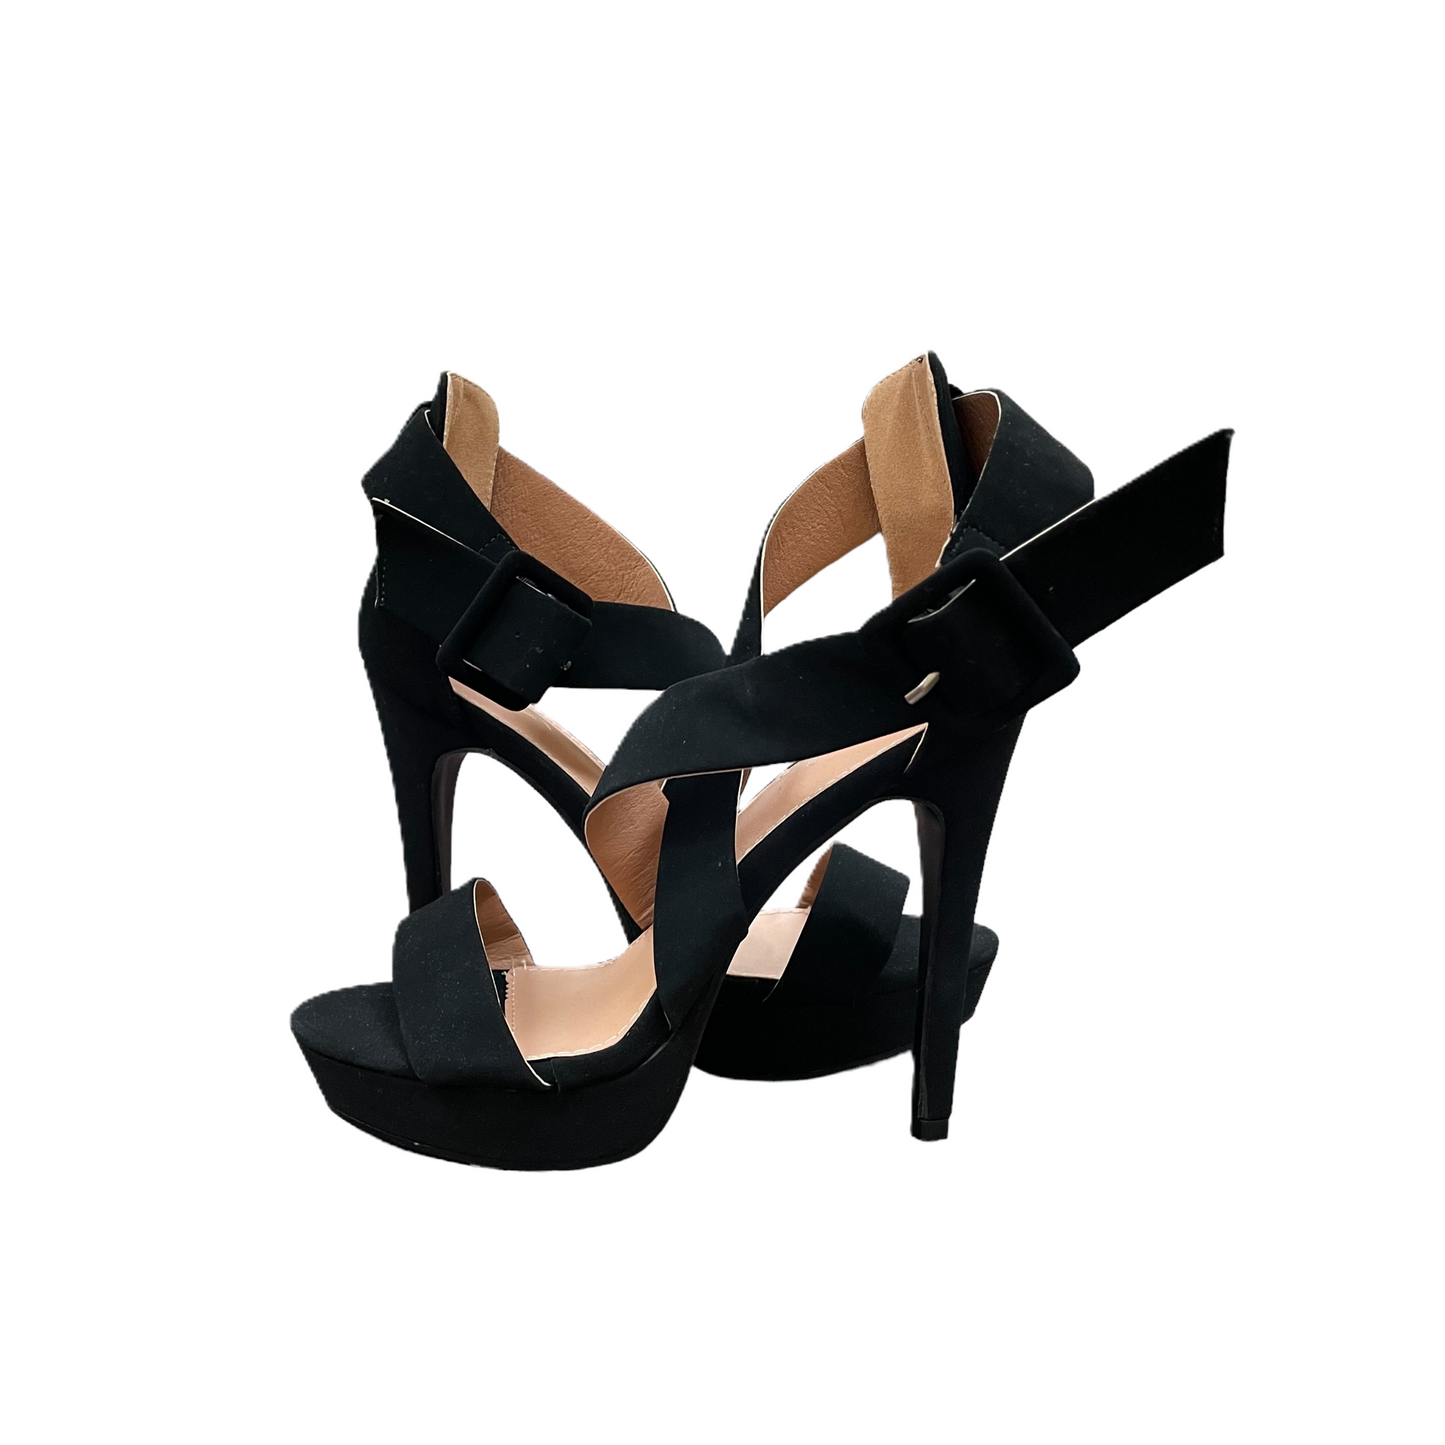 Black Shoes Heels Stiletto By Windsor, Size: 8